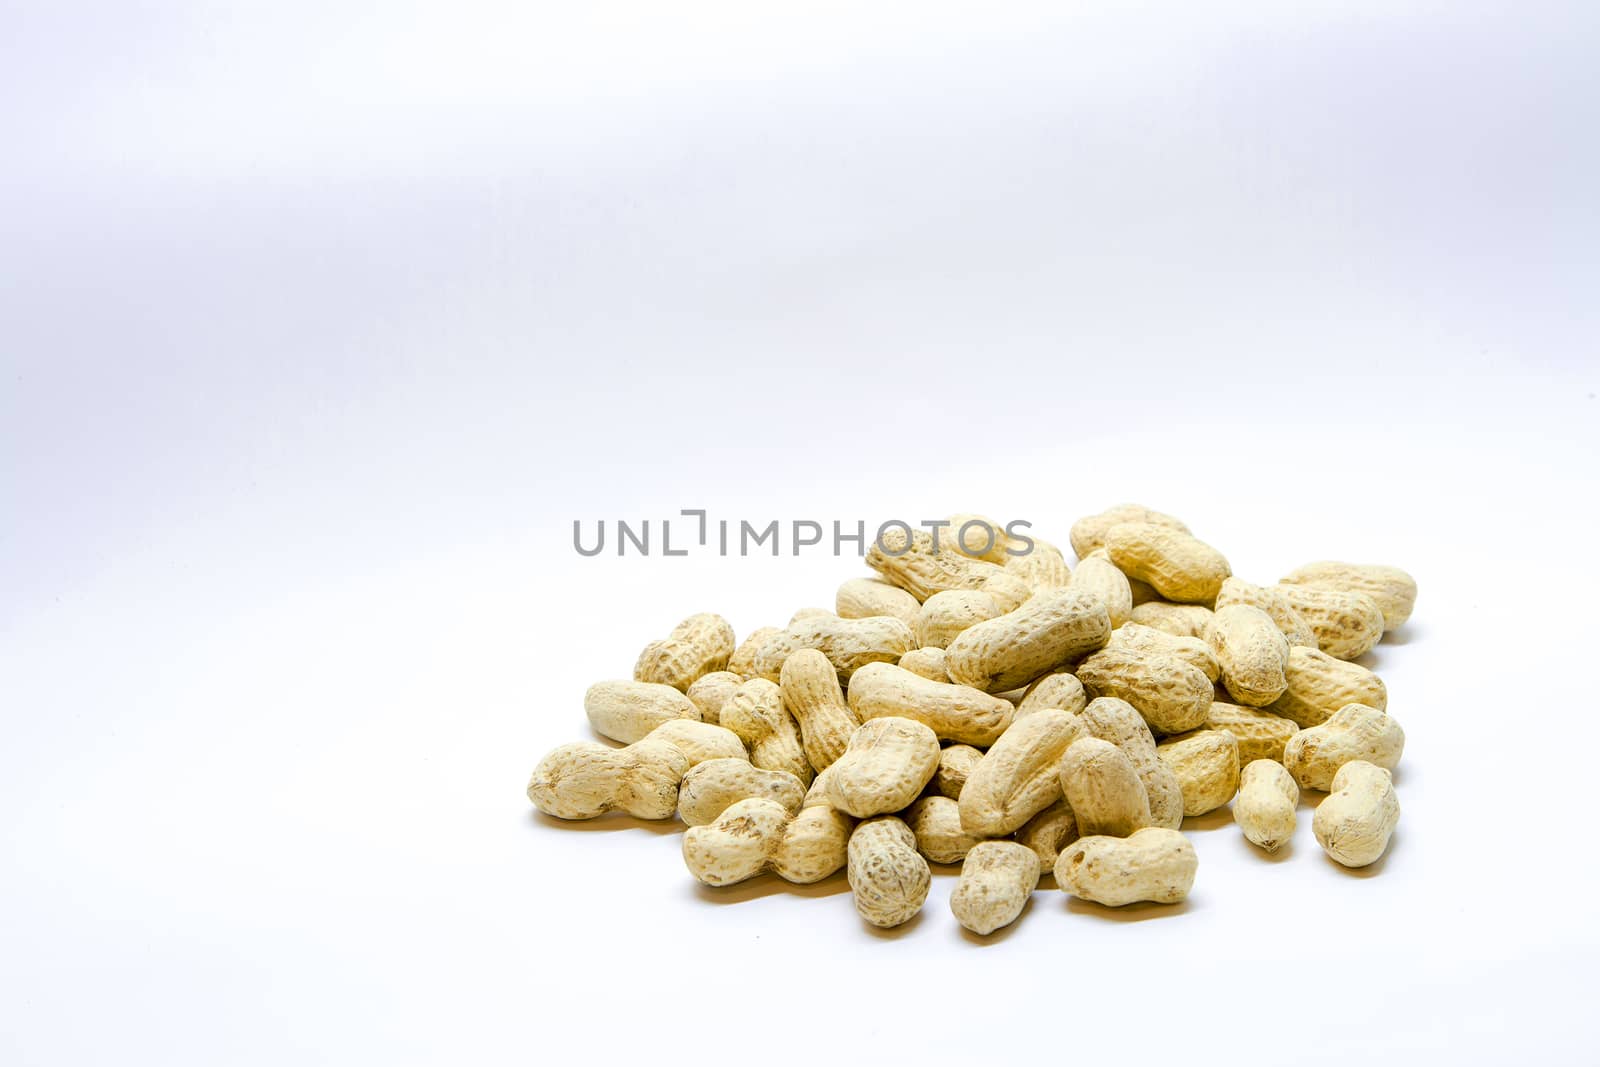 Peanuts on a white background by TakerWalker